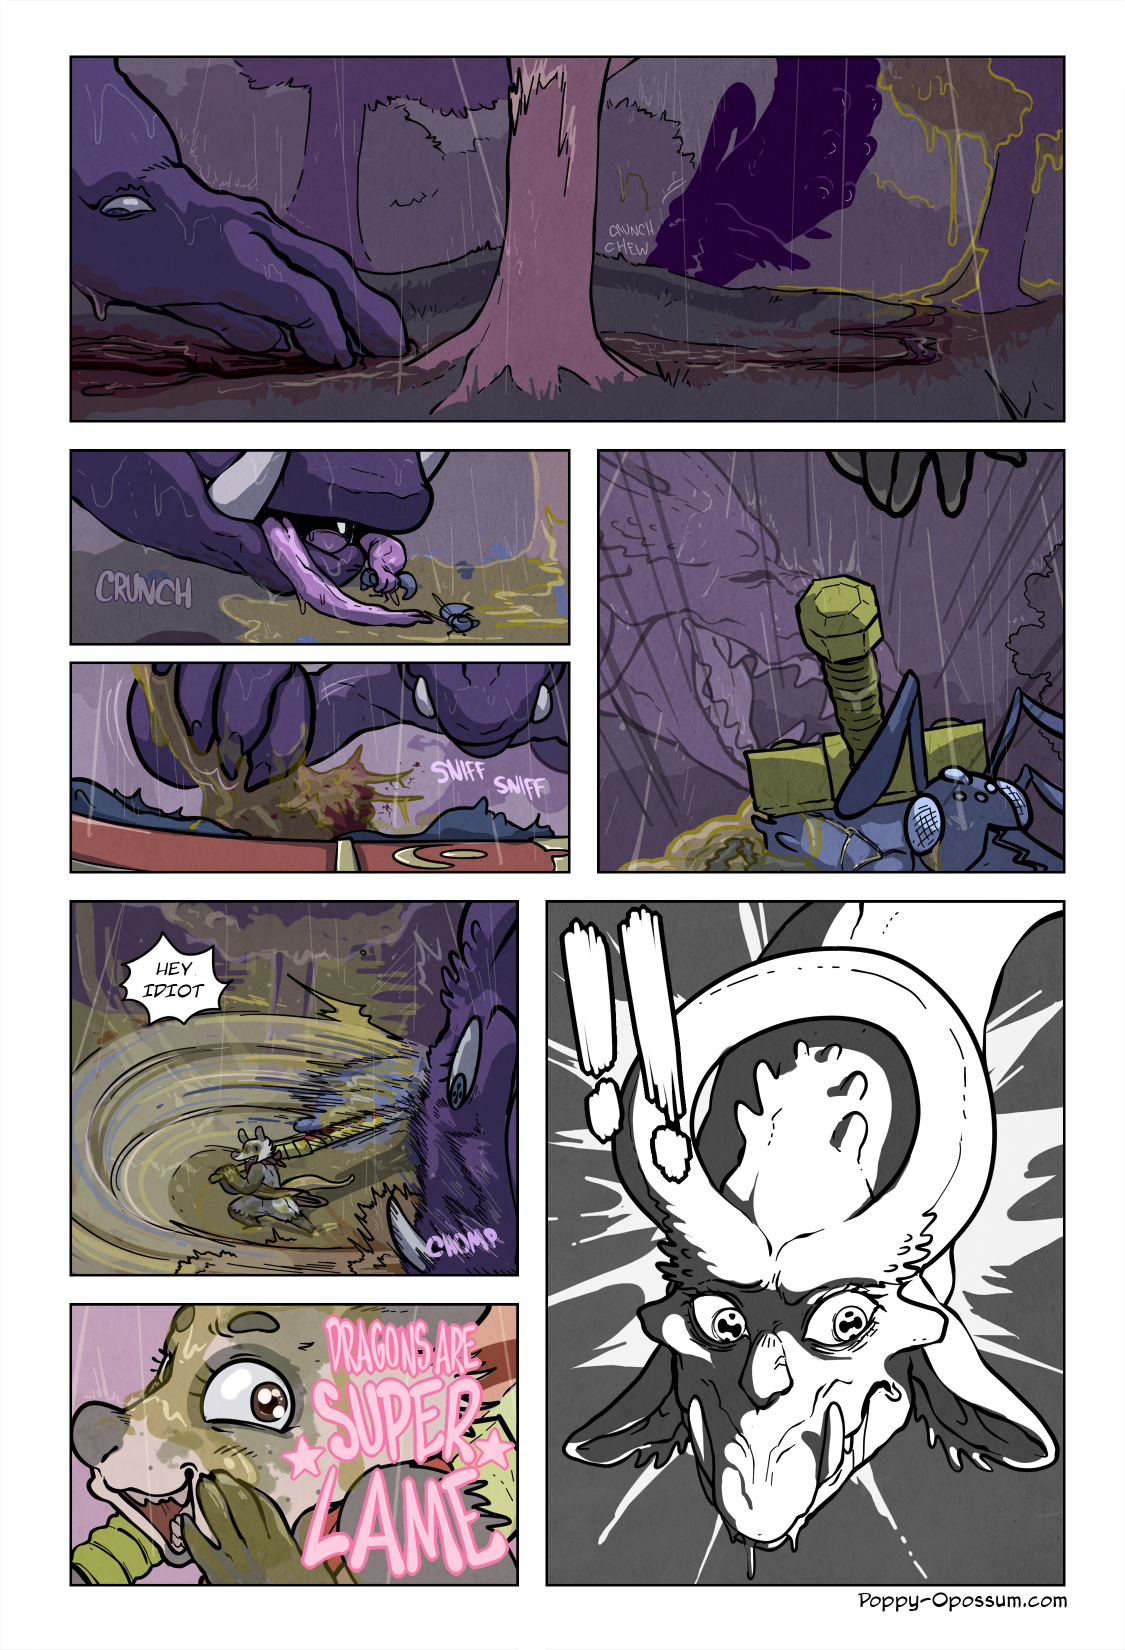 2015-05-18-page31HowToOffendADragon.png